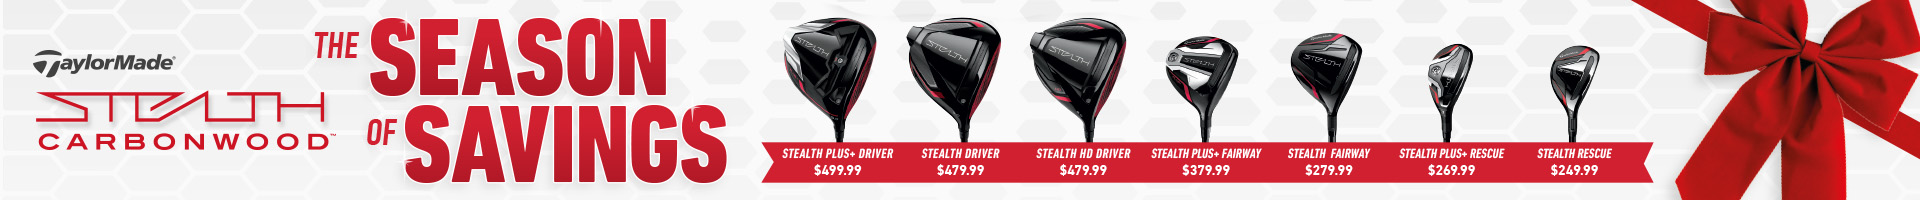 TaylorMade Stealth Price Drop Banner